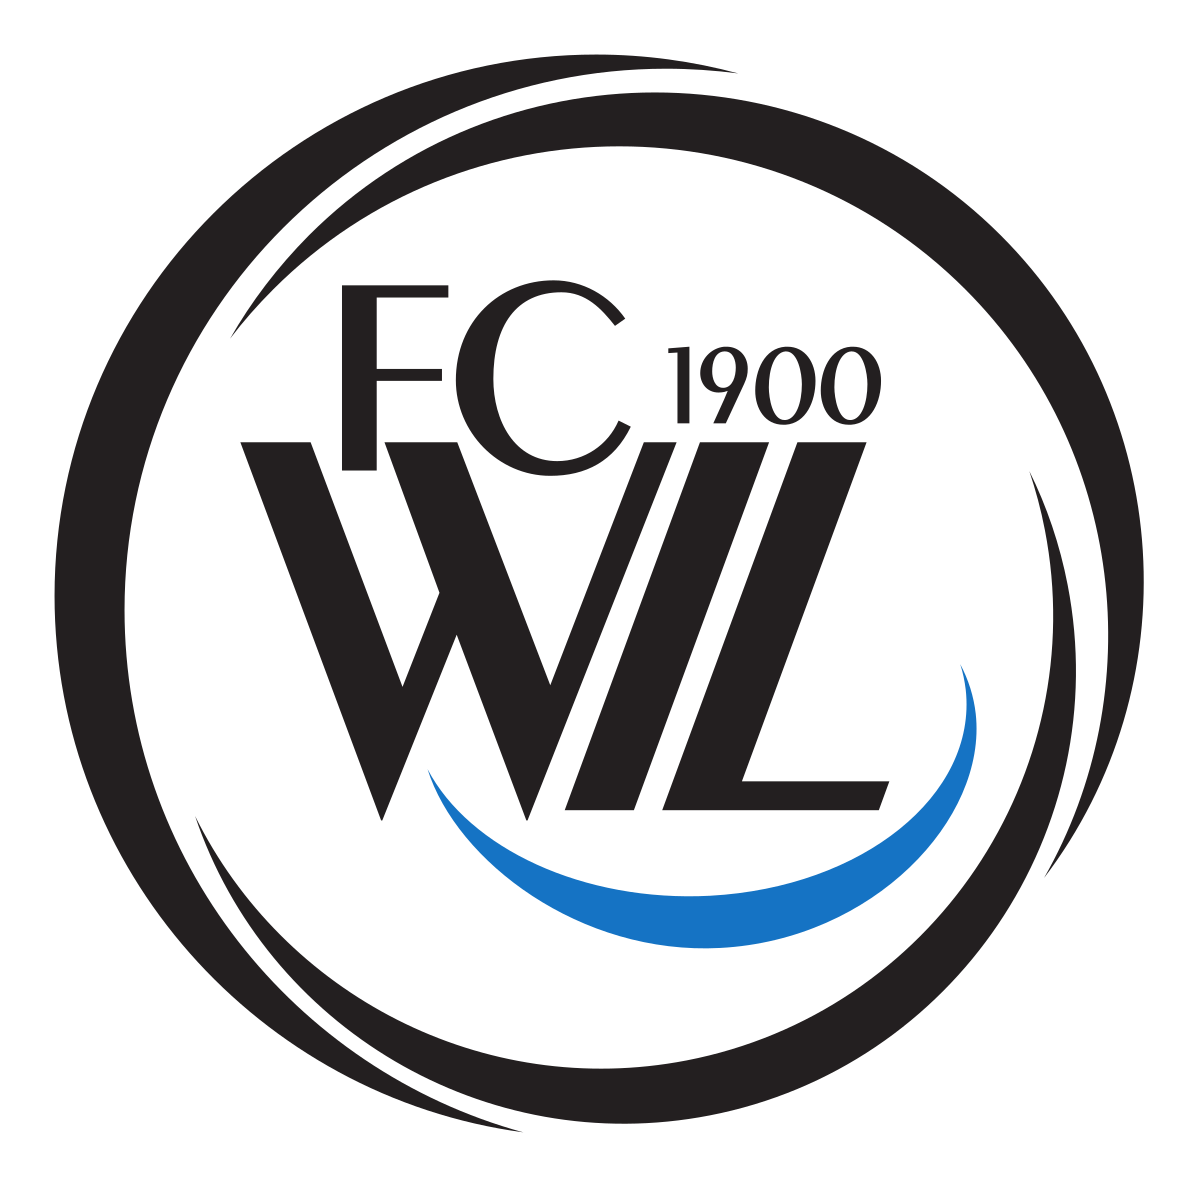 Wil 1900 (W)